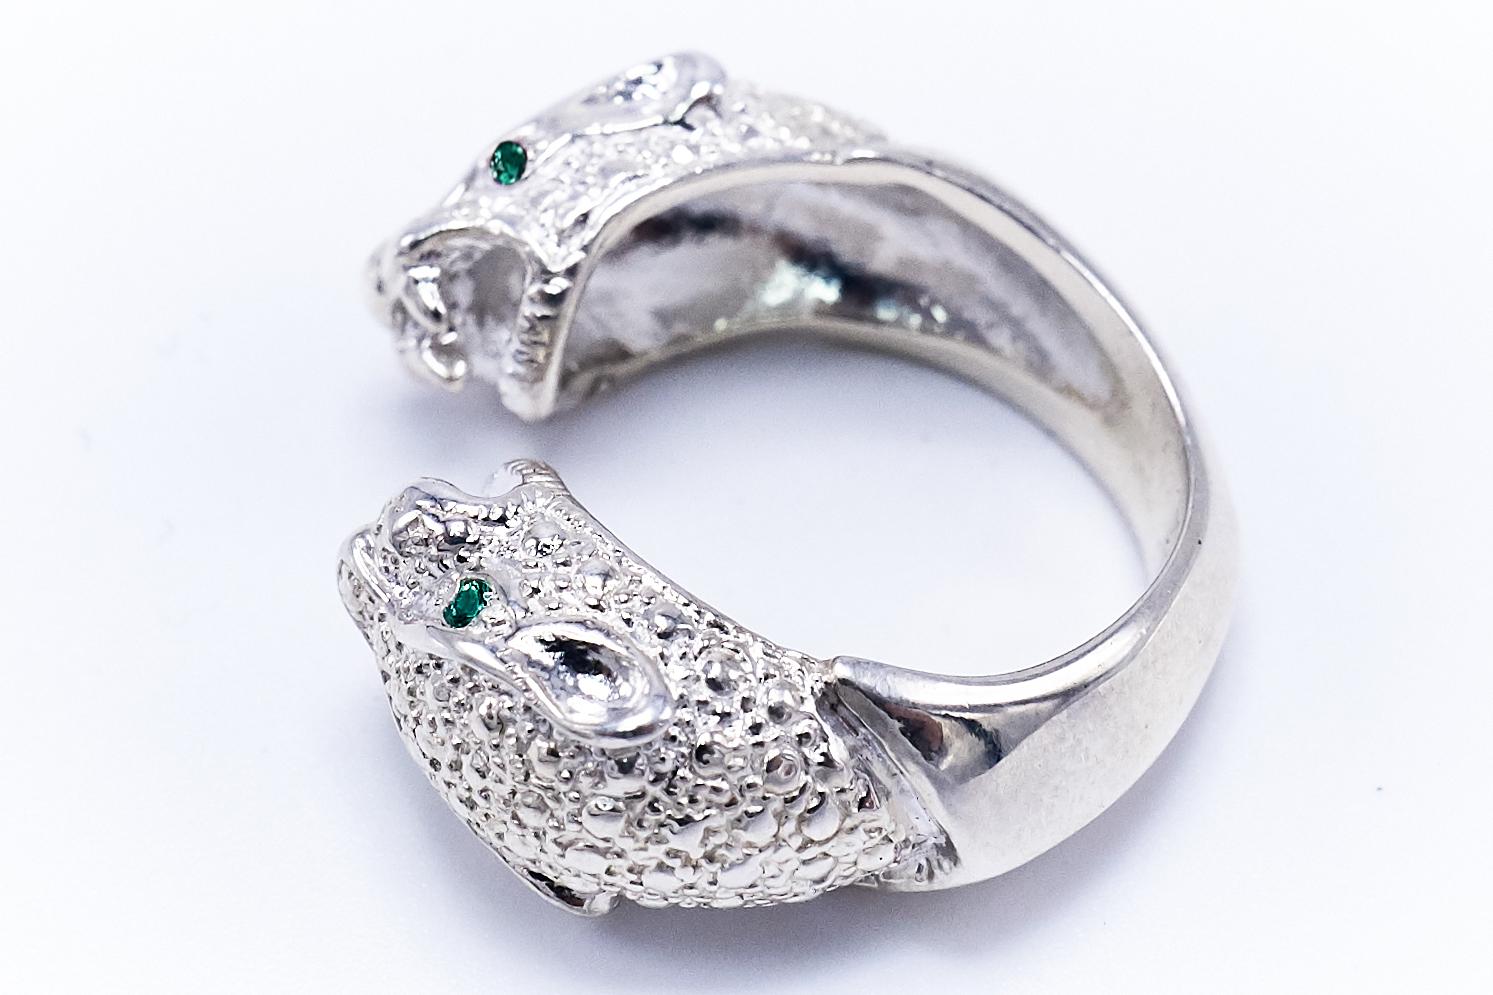 Emerald Jaguar Ring Silver Animal Jewelry Cocktail J Dauphin In New Condition For Sale In Los Angeles, CA